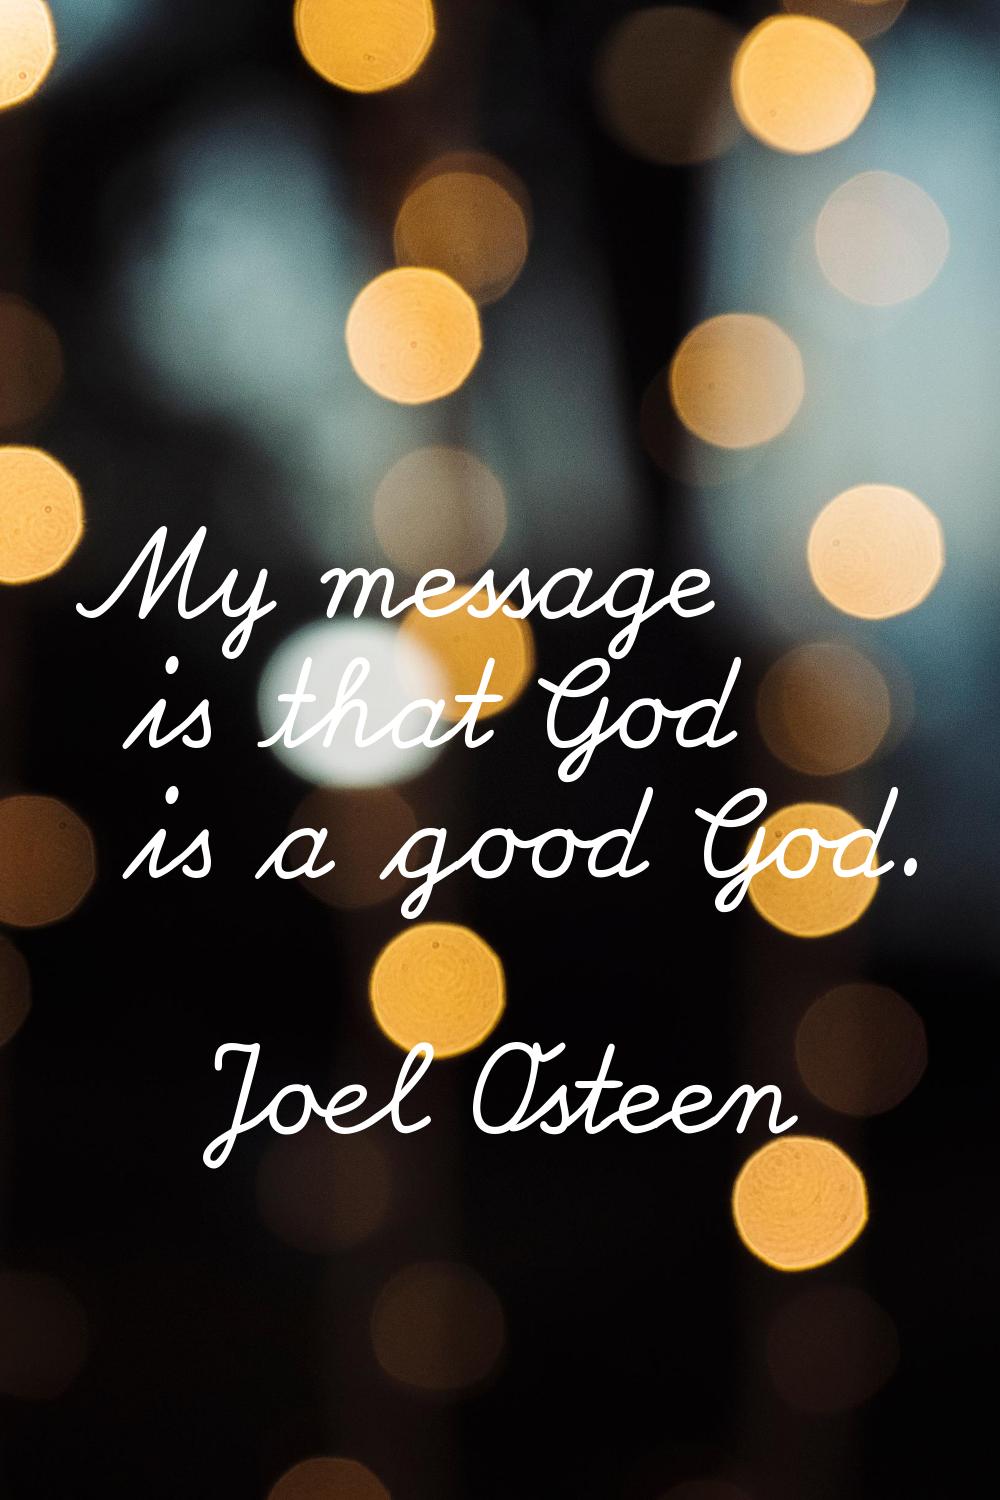 My message is that God is a good God.